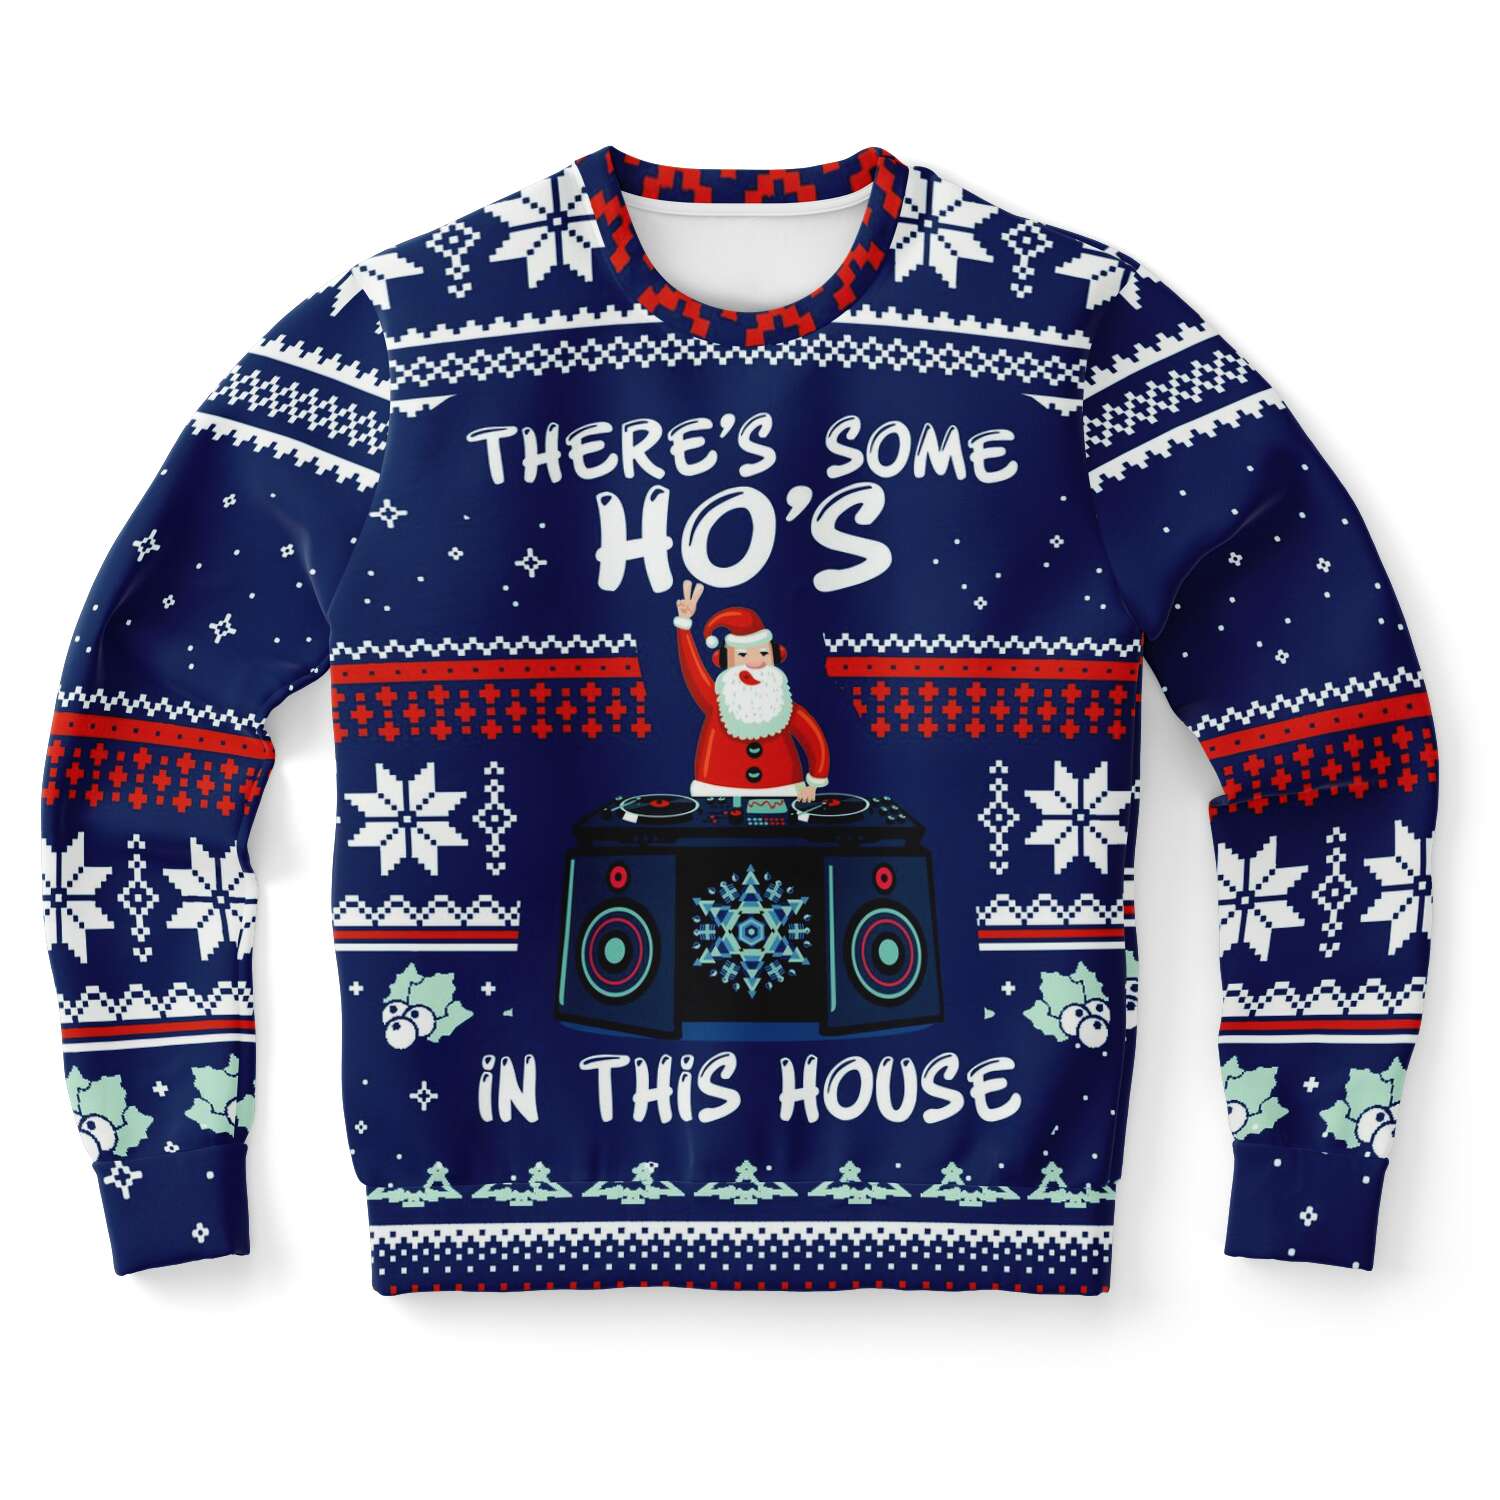 Ho's in this house - Sweater